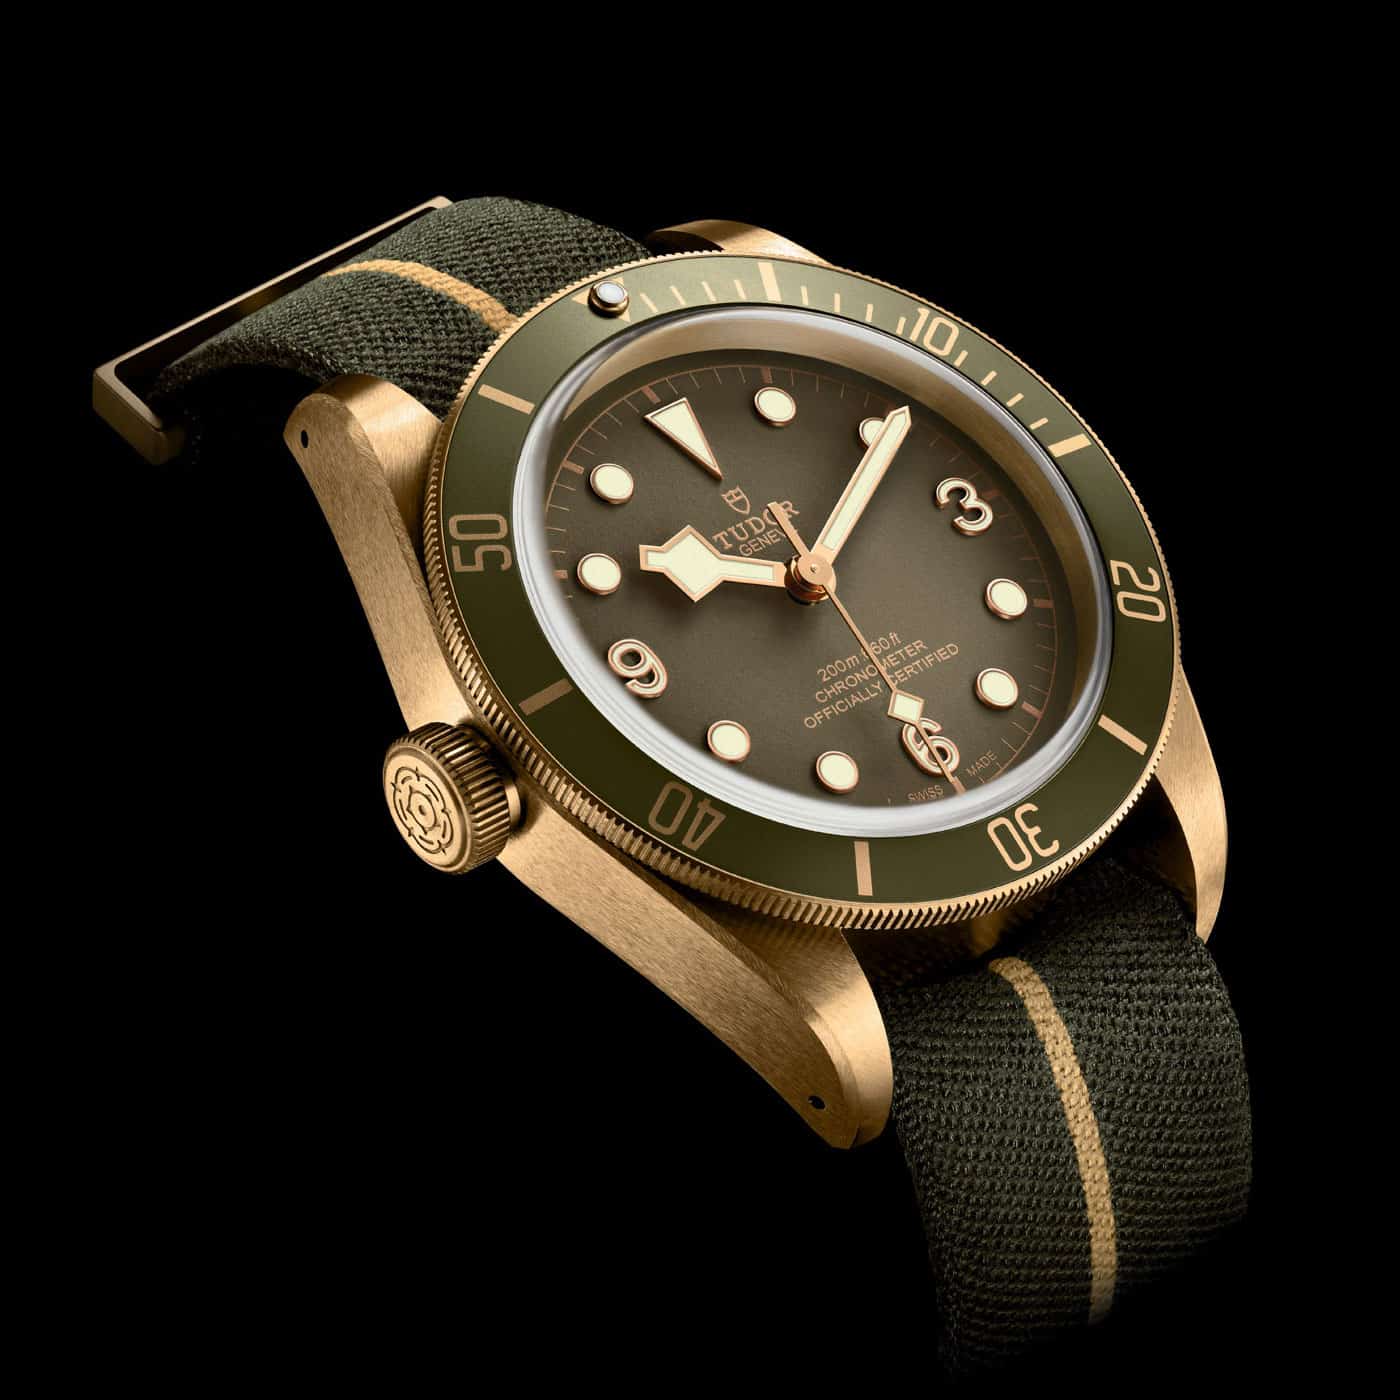 FANTASY WATCH: Modding a Standard Tudor Black Bay Heritage into the Lefty  Style of the 2017 